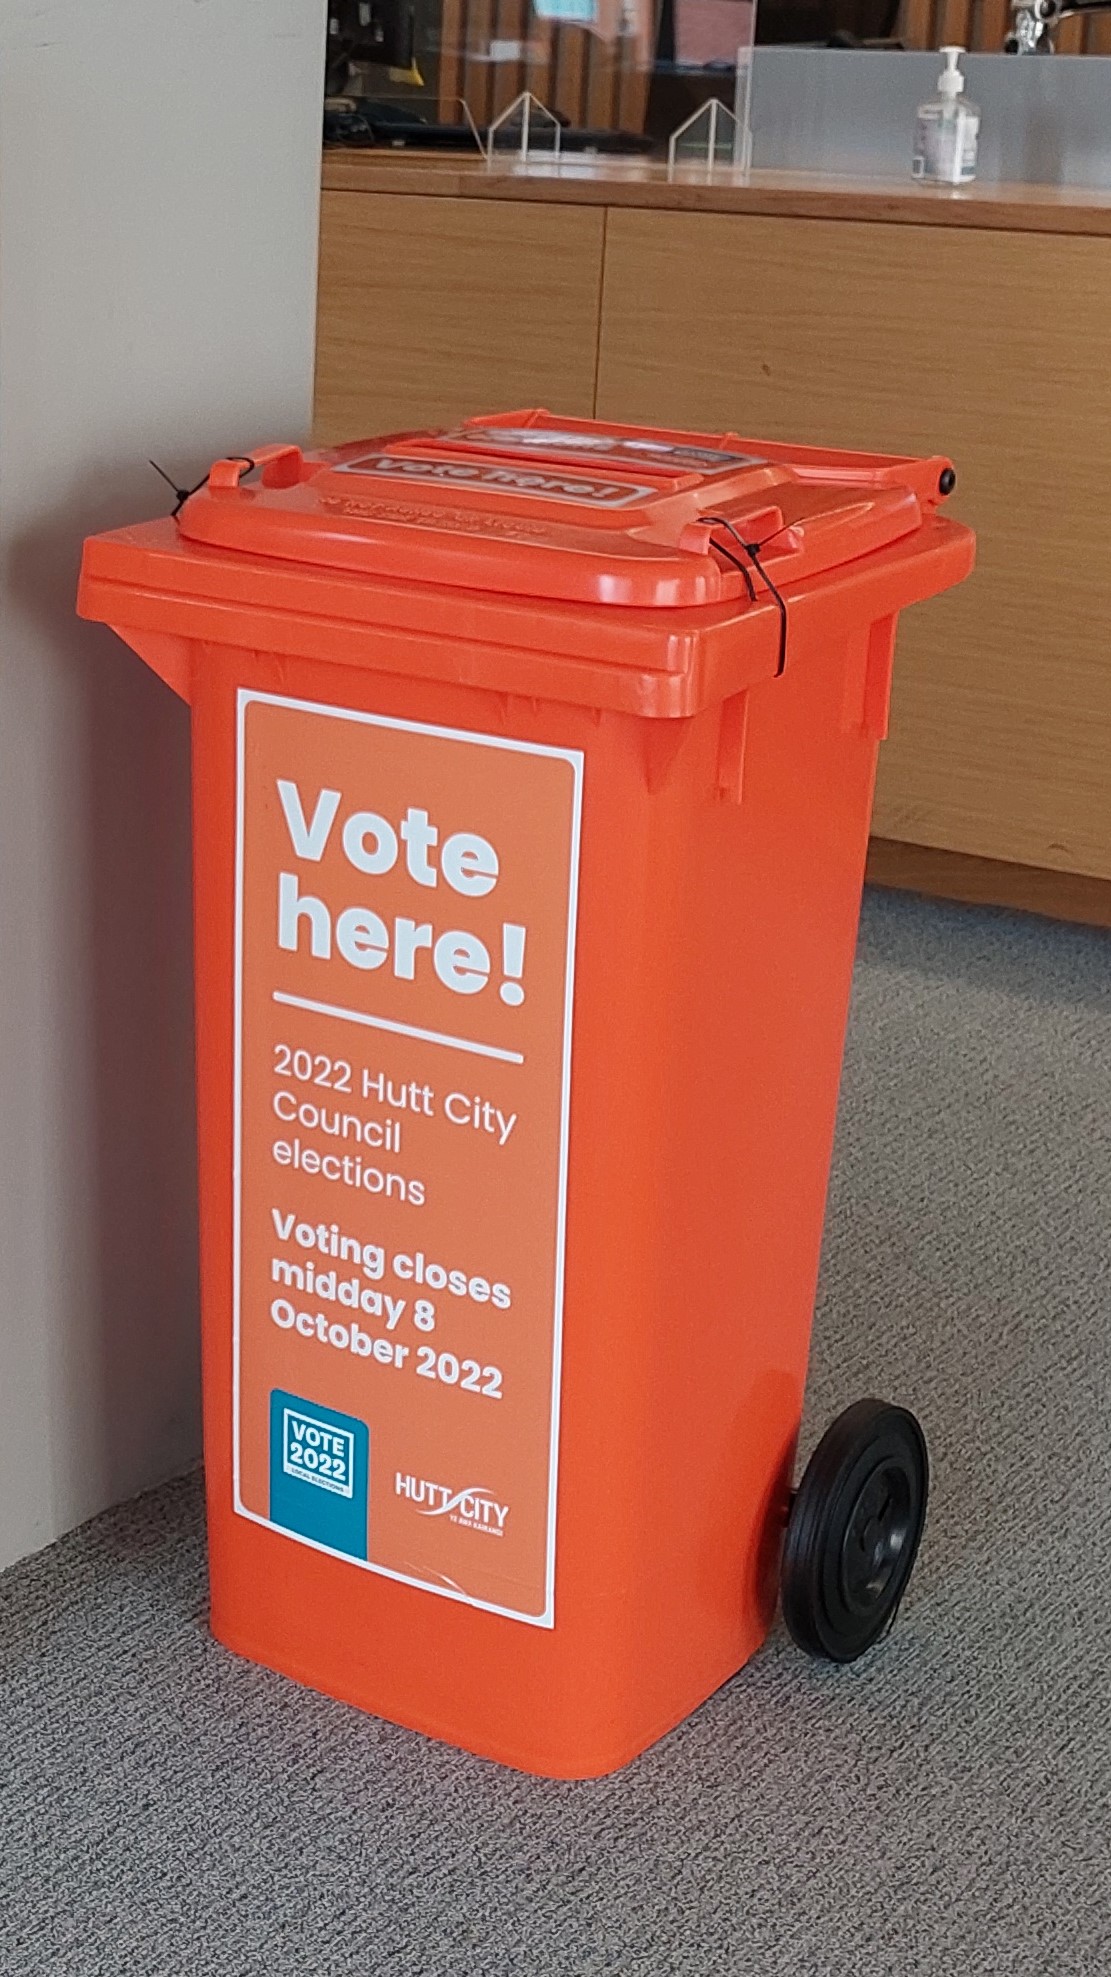 An orange wheelie bin with Vote here! on the side and a ballot hole in the top.